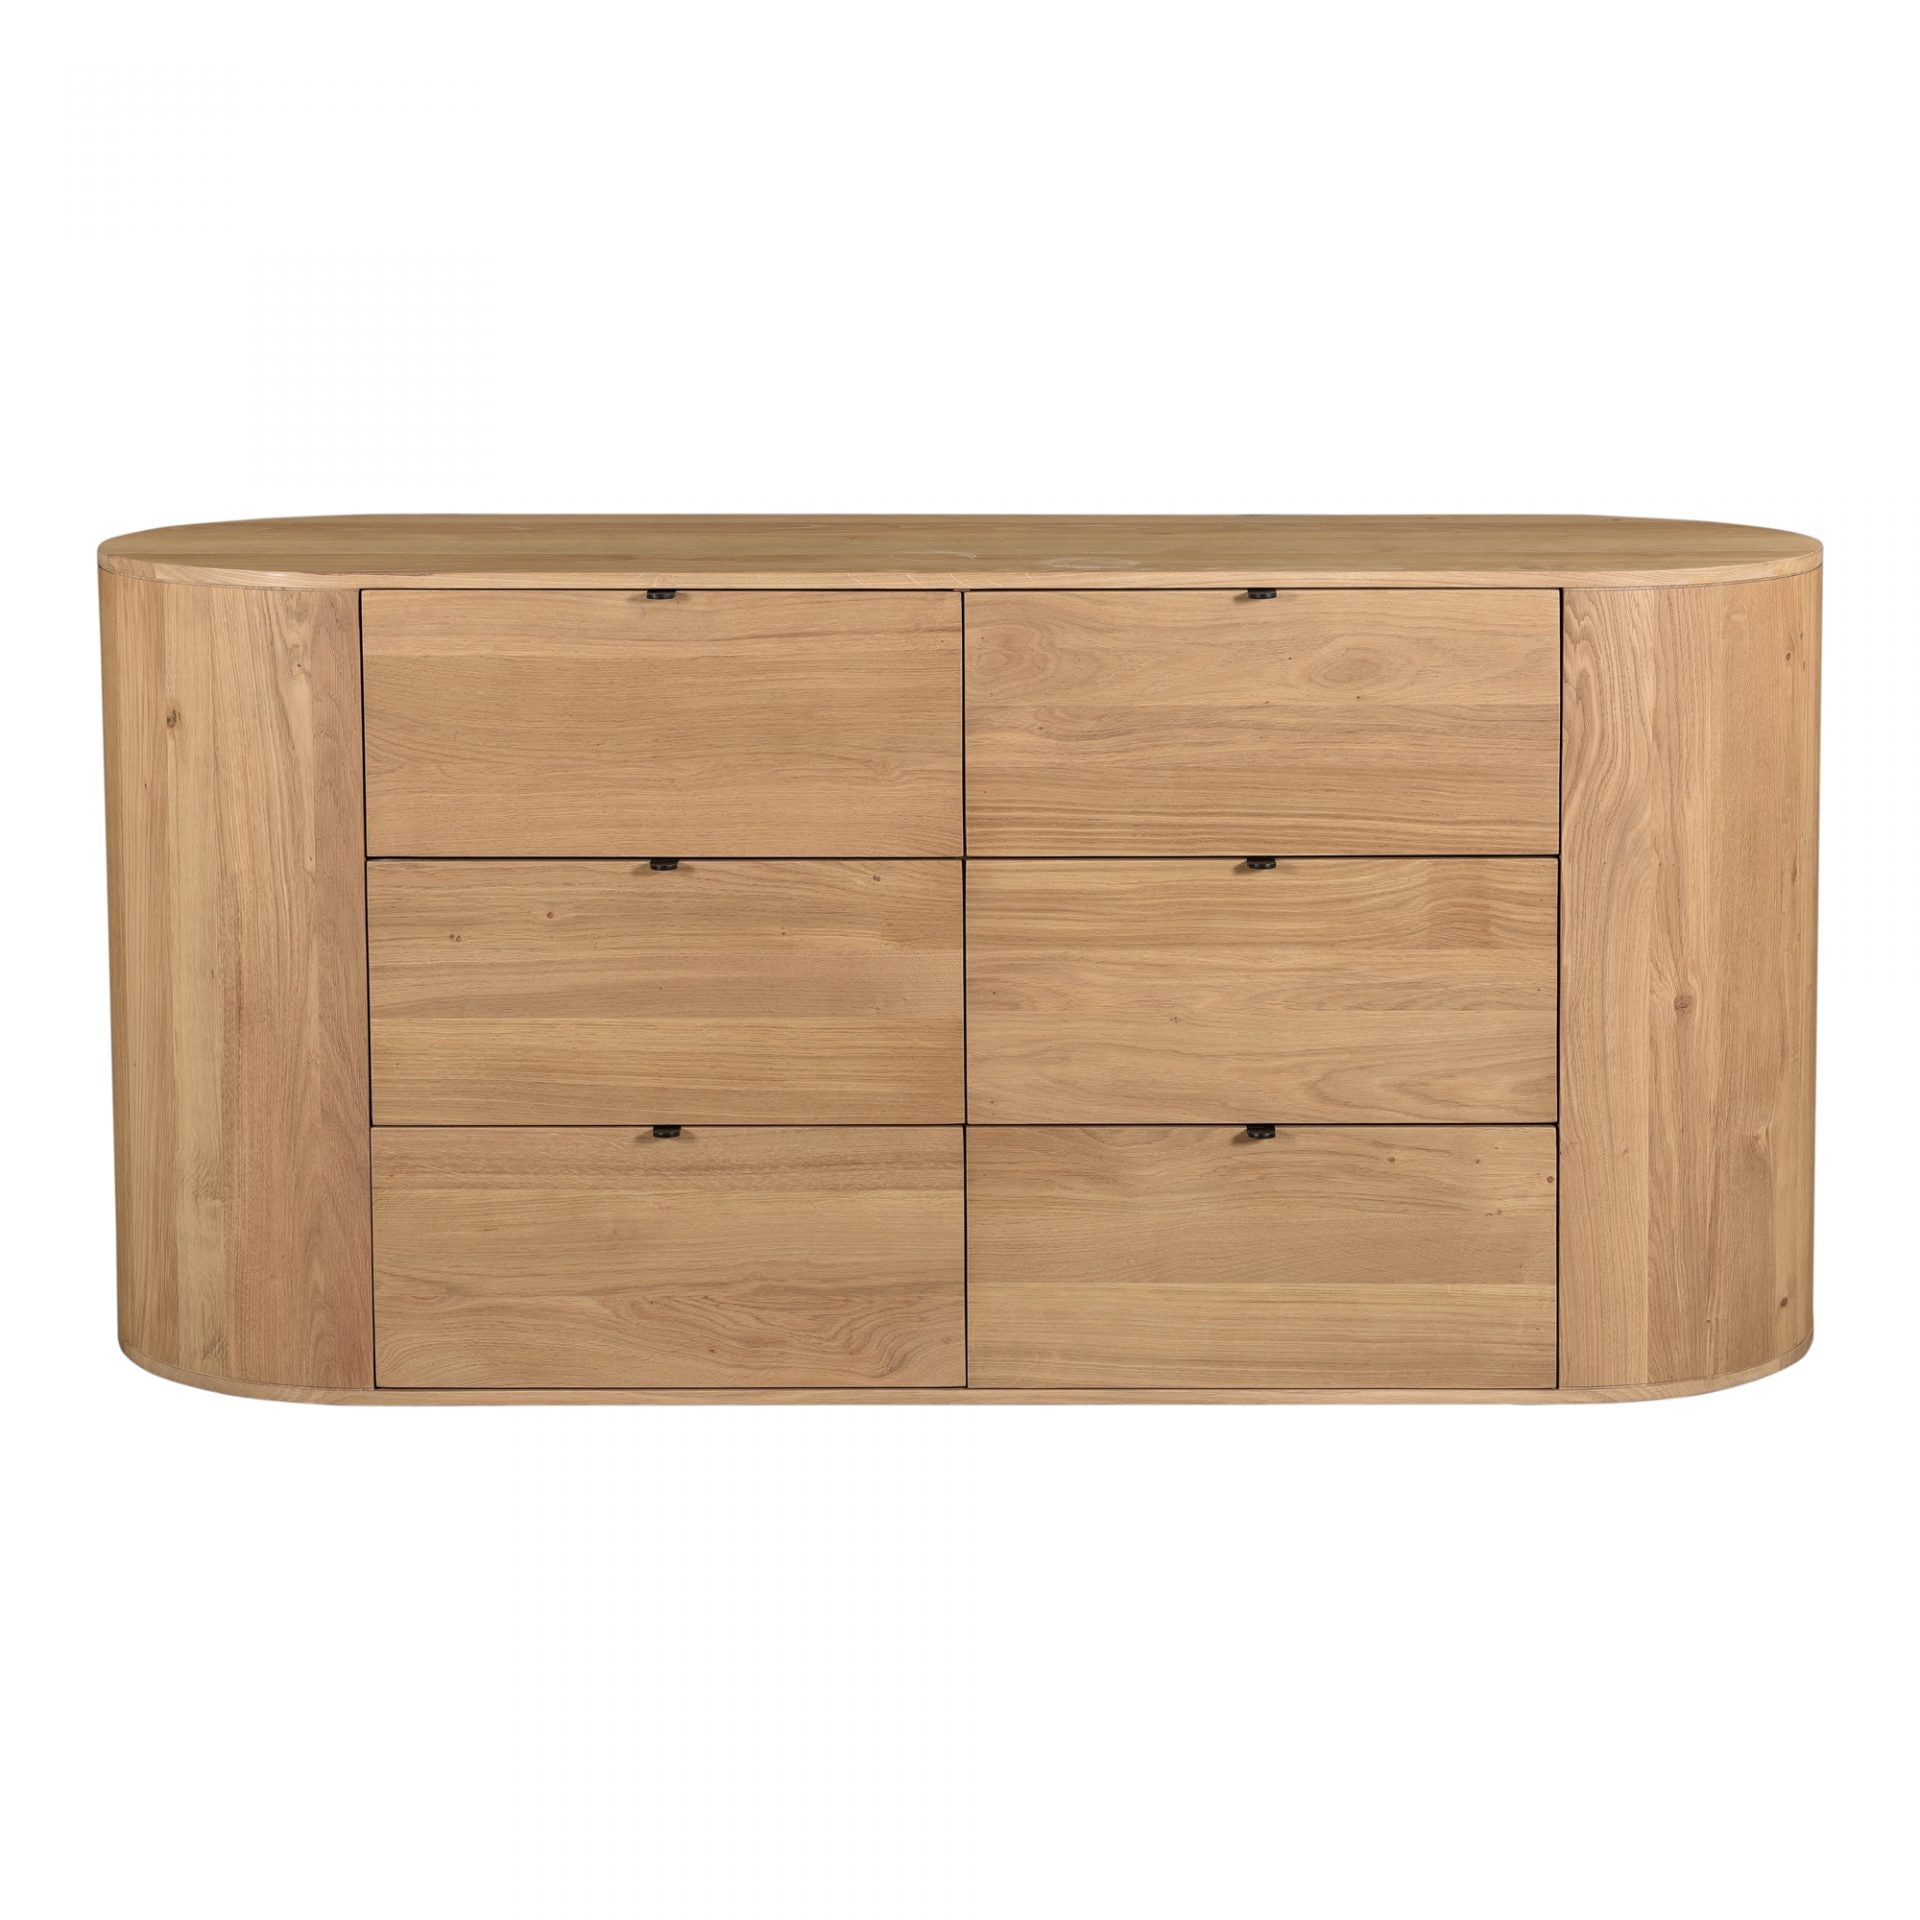 Crafted from solid oak with a natural semi-gloss finish, the Theo Dresser is a natural beauty. The six drawers are deep and soft-closing - the perfect combo for a bedroom dresser!  Size: 66"W x 22.5"D x 31.5"H Material: Solid Oak